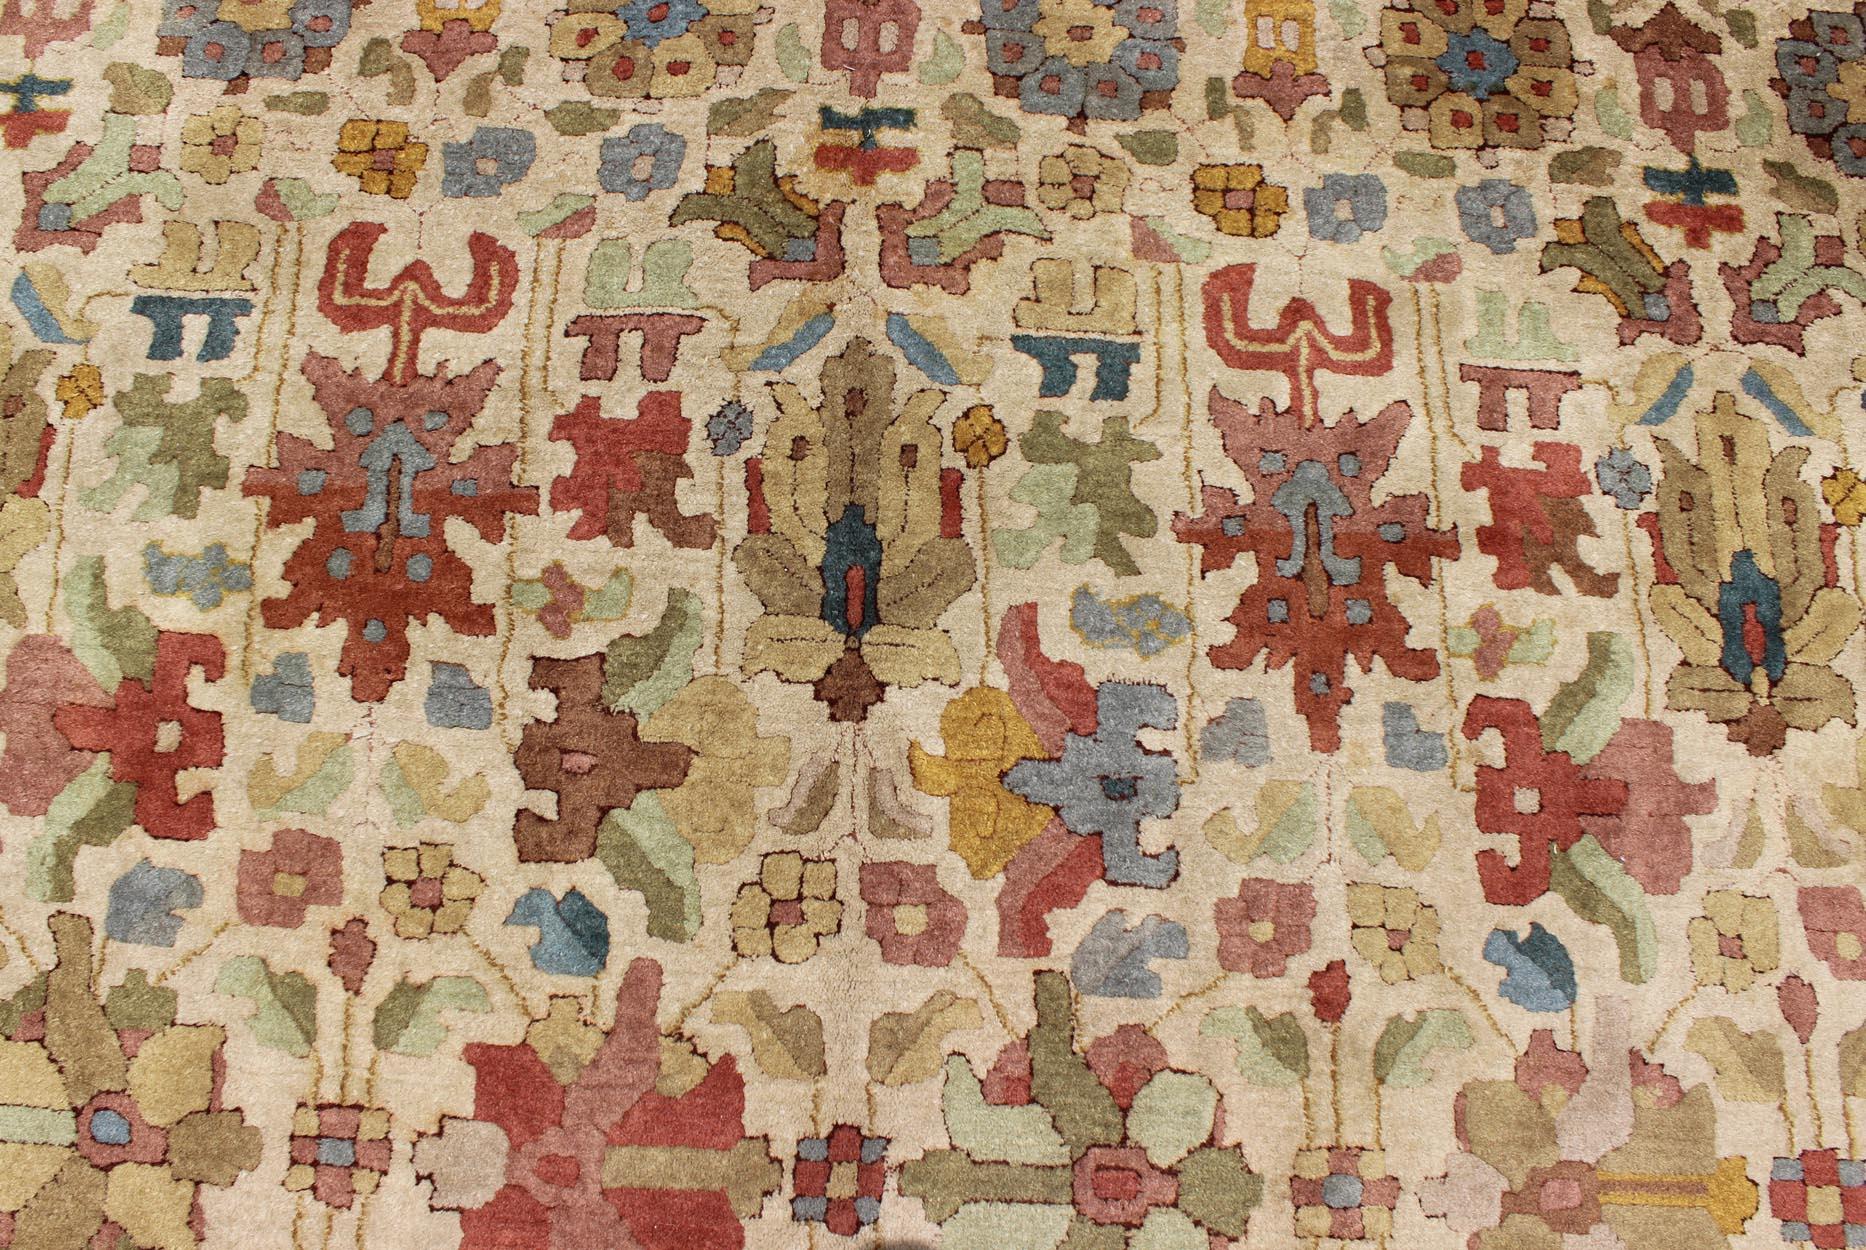 20th Century Vintage German Rug with Sub-Geometric Palmettes, Blossoms and Leaves